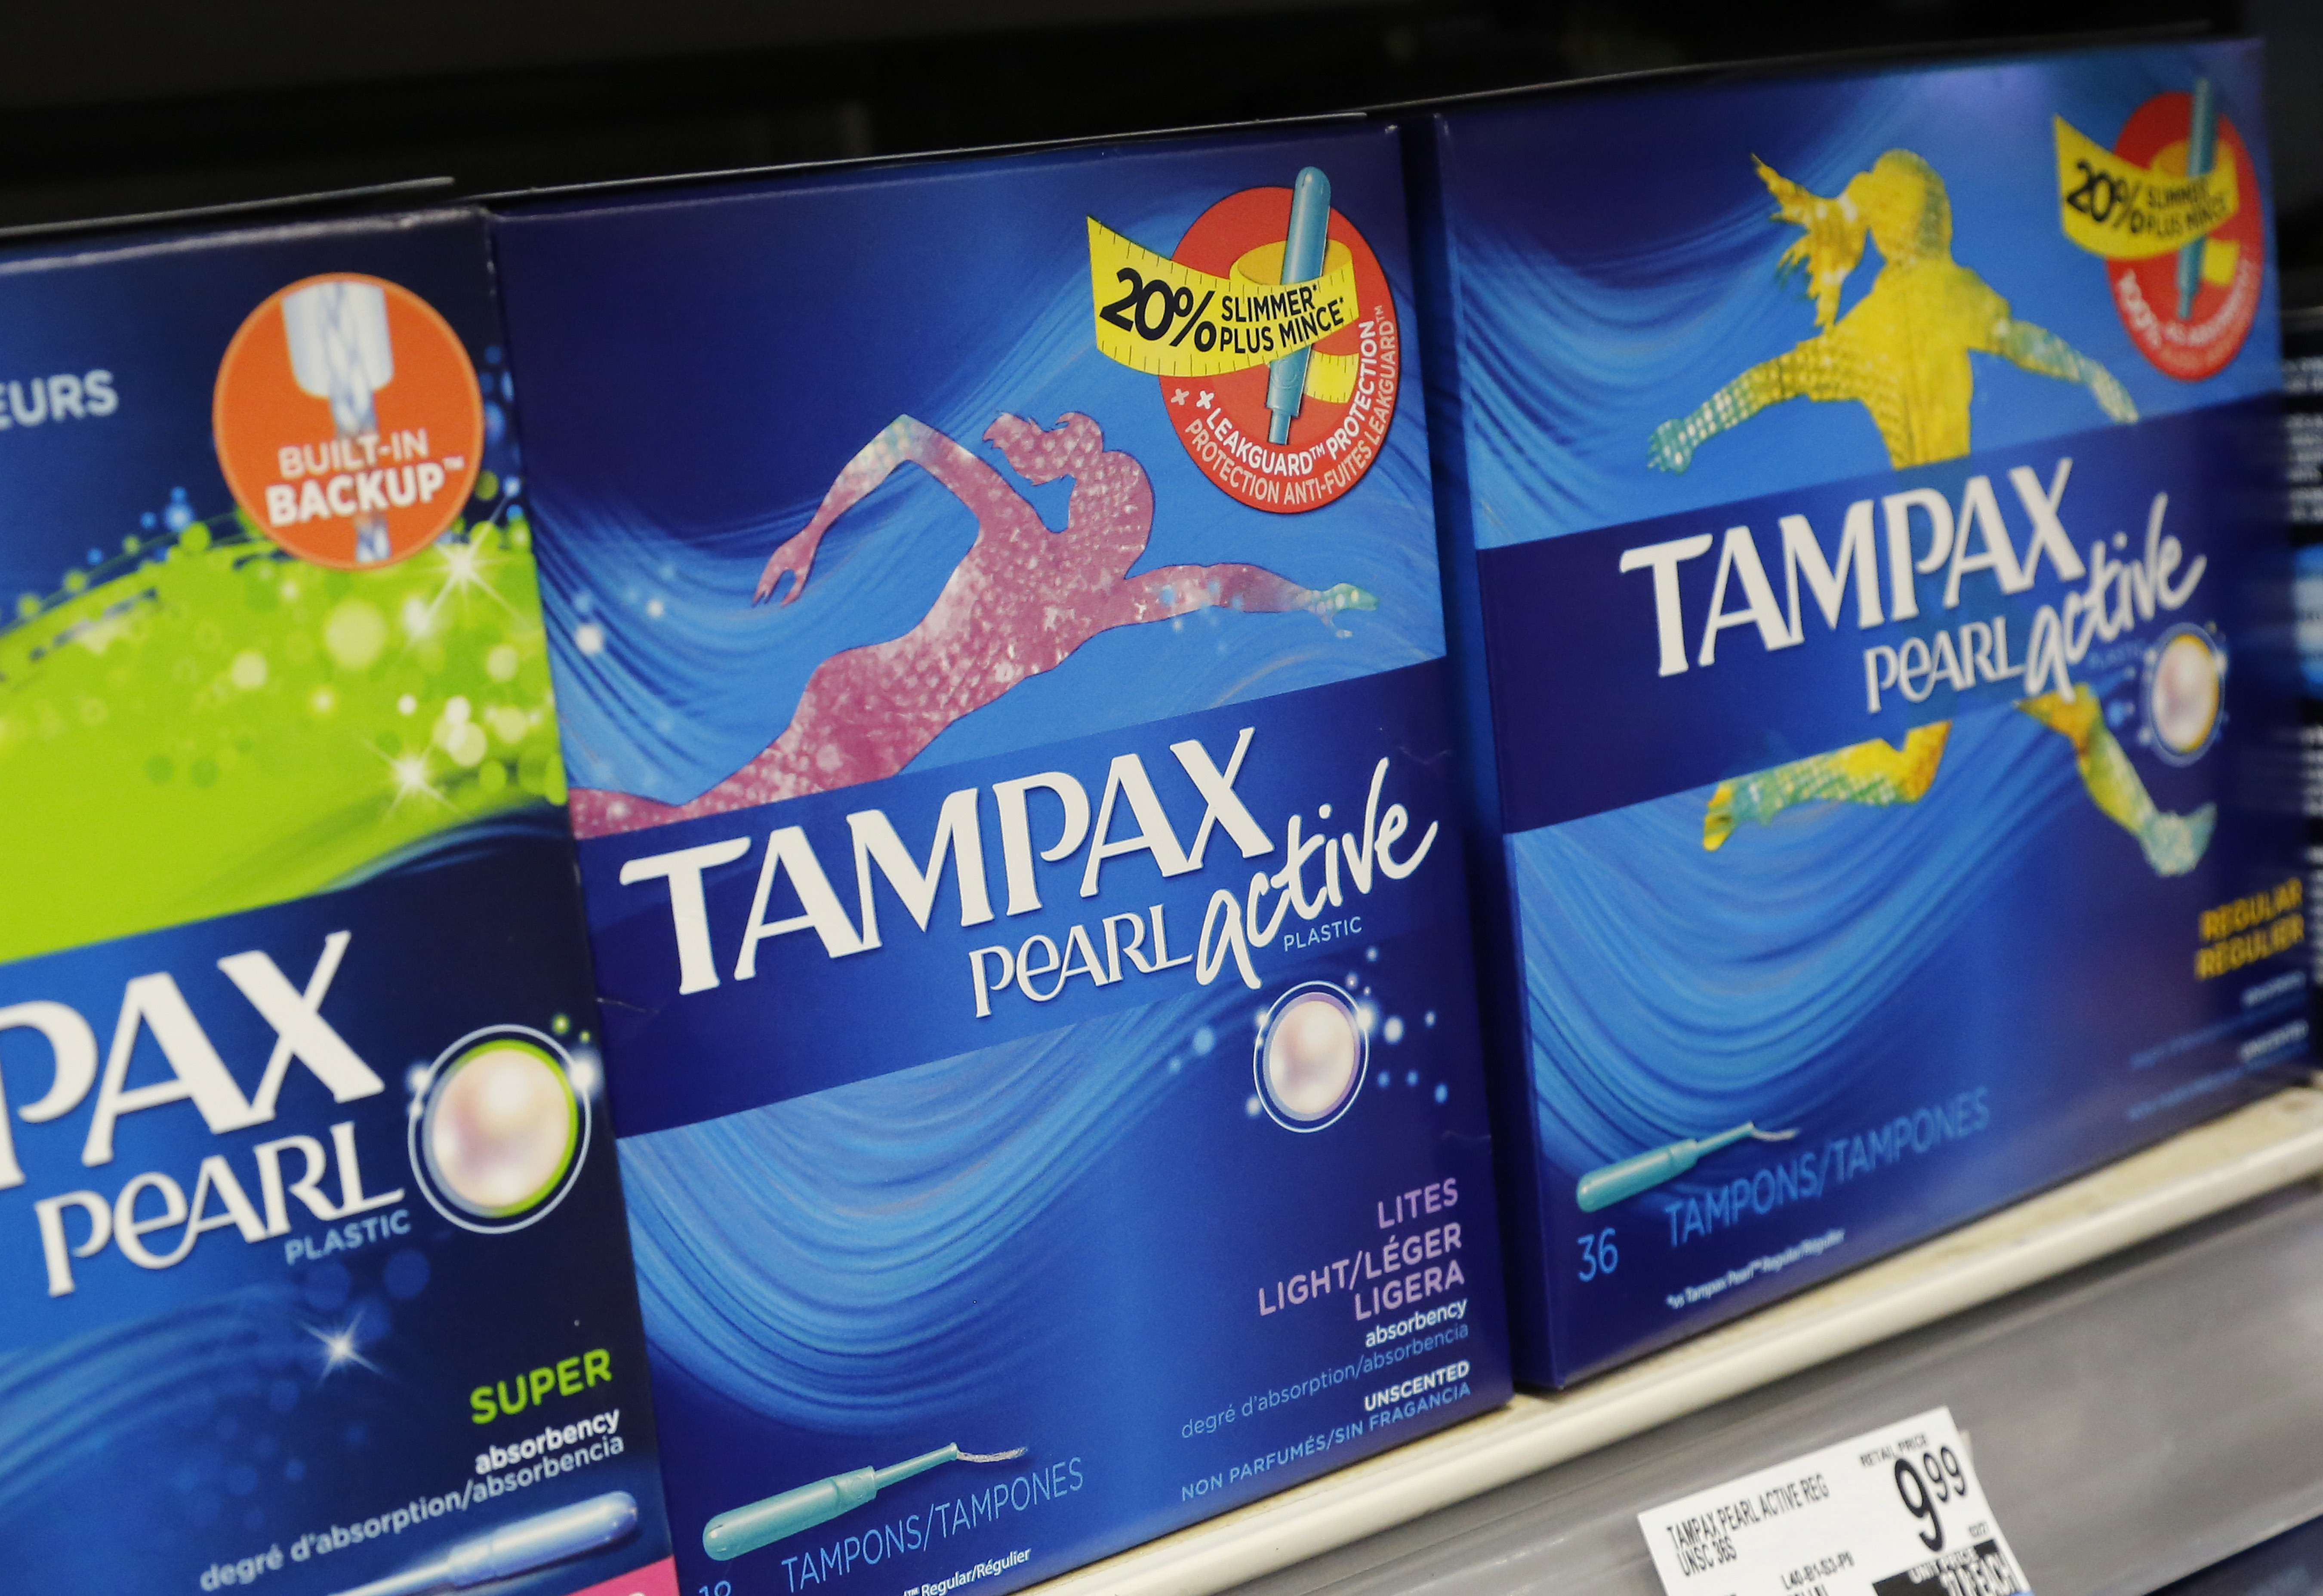 Taxes may be offset by diaper, feminine hygiene donation